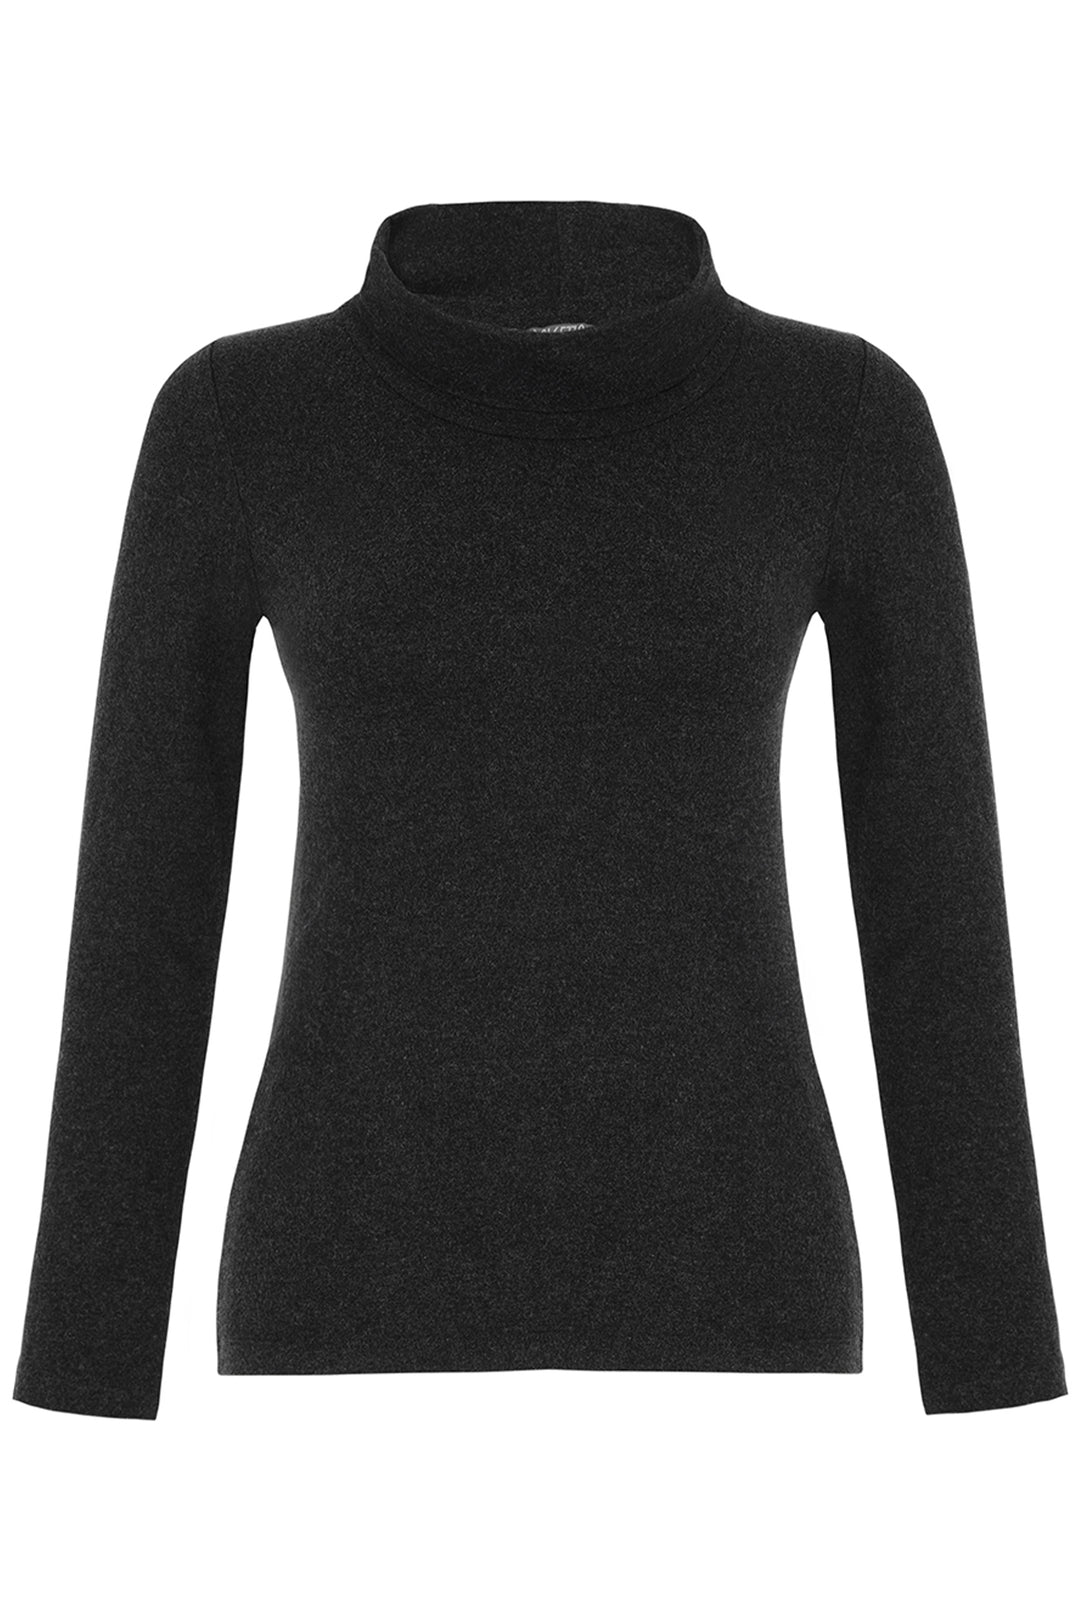 Its simple yet elegant cowl neck makes it a perfect piece for layering or wearing as a basic top indoors.